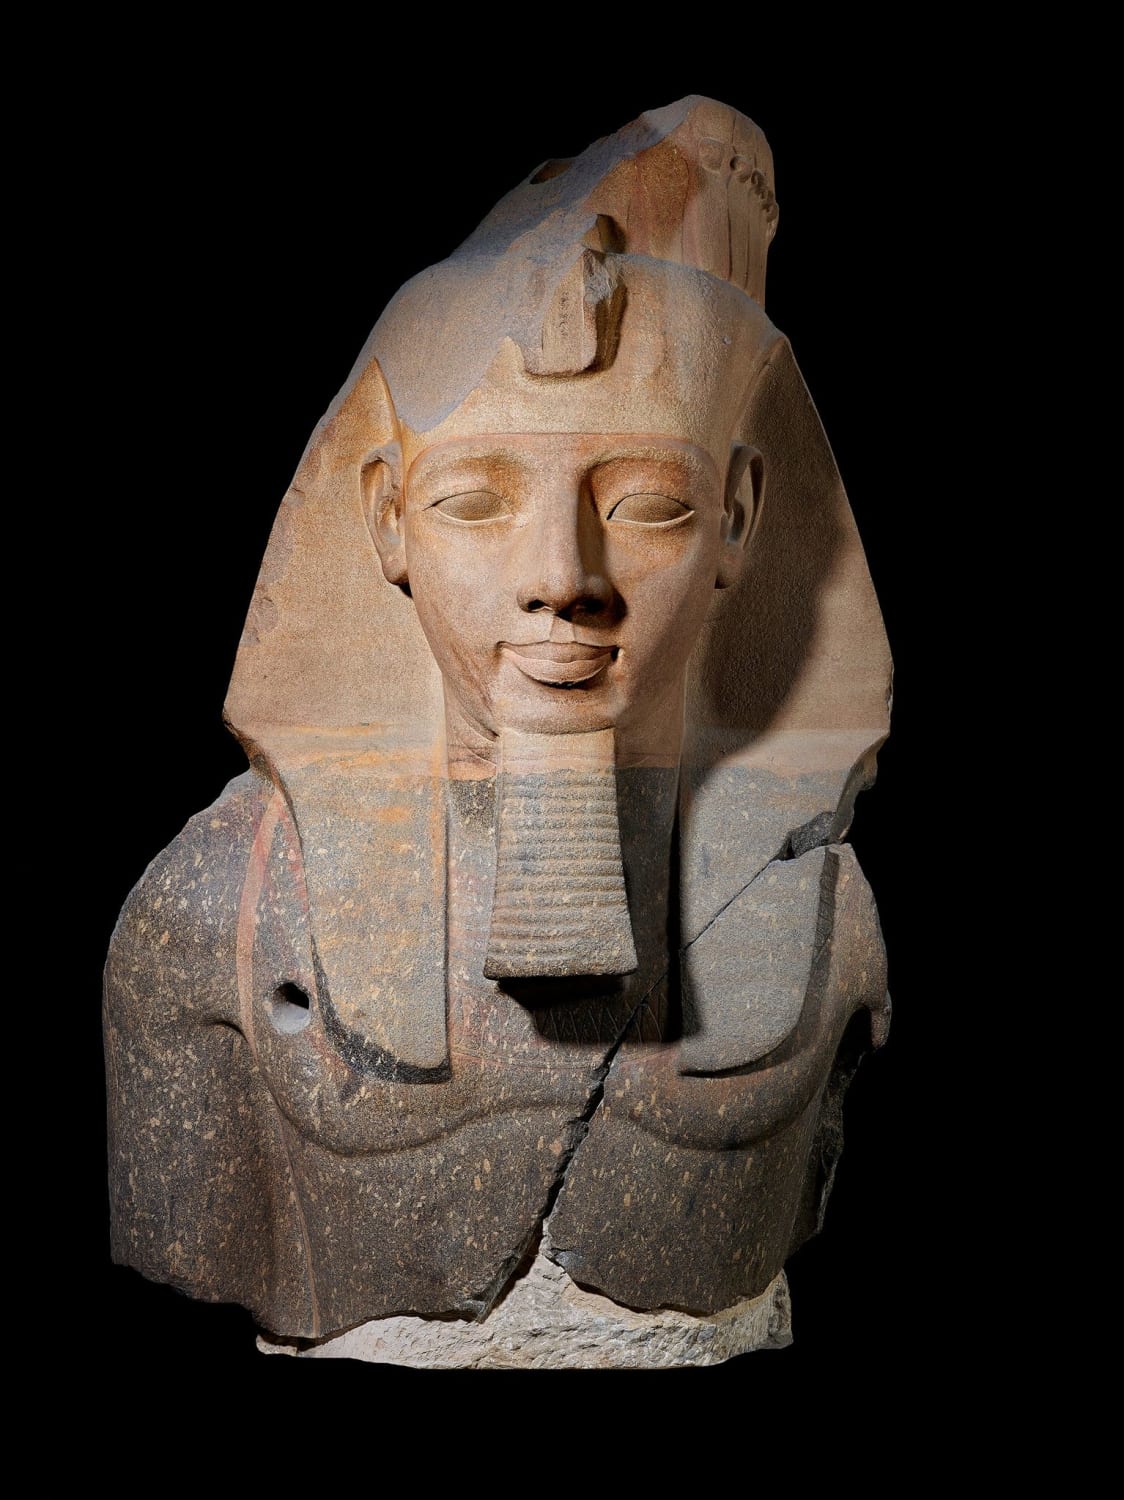 Ramesses II ruled ancient Egypt for nearly 67 years. He ascended the throne in 1279 BC and reigned until his death at the age of 90